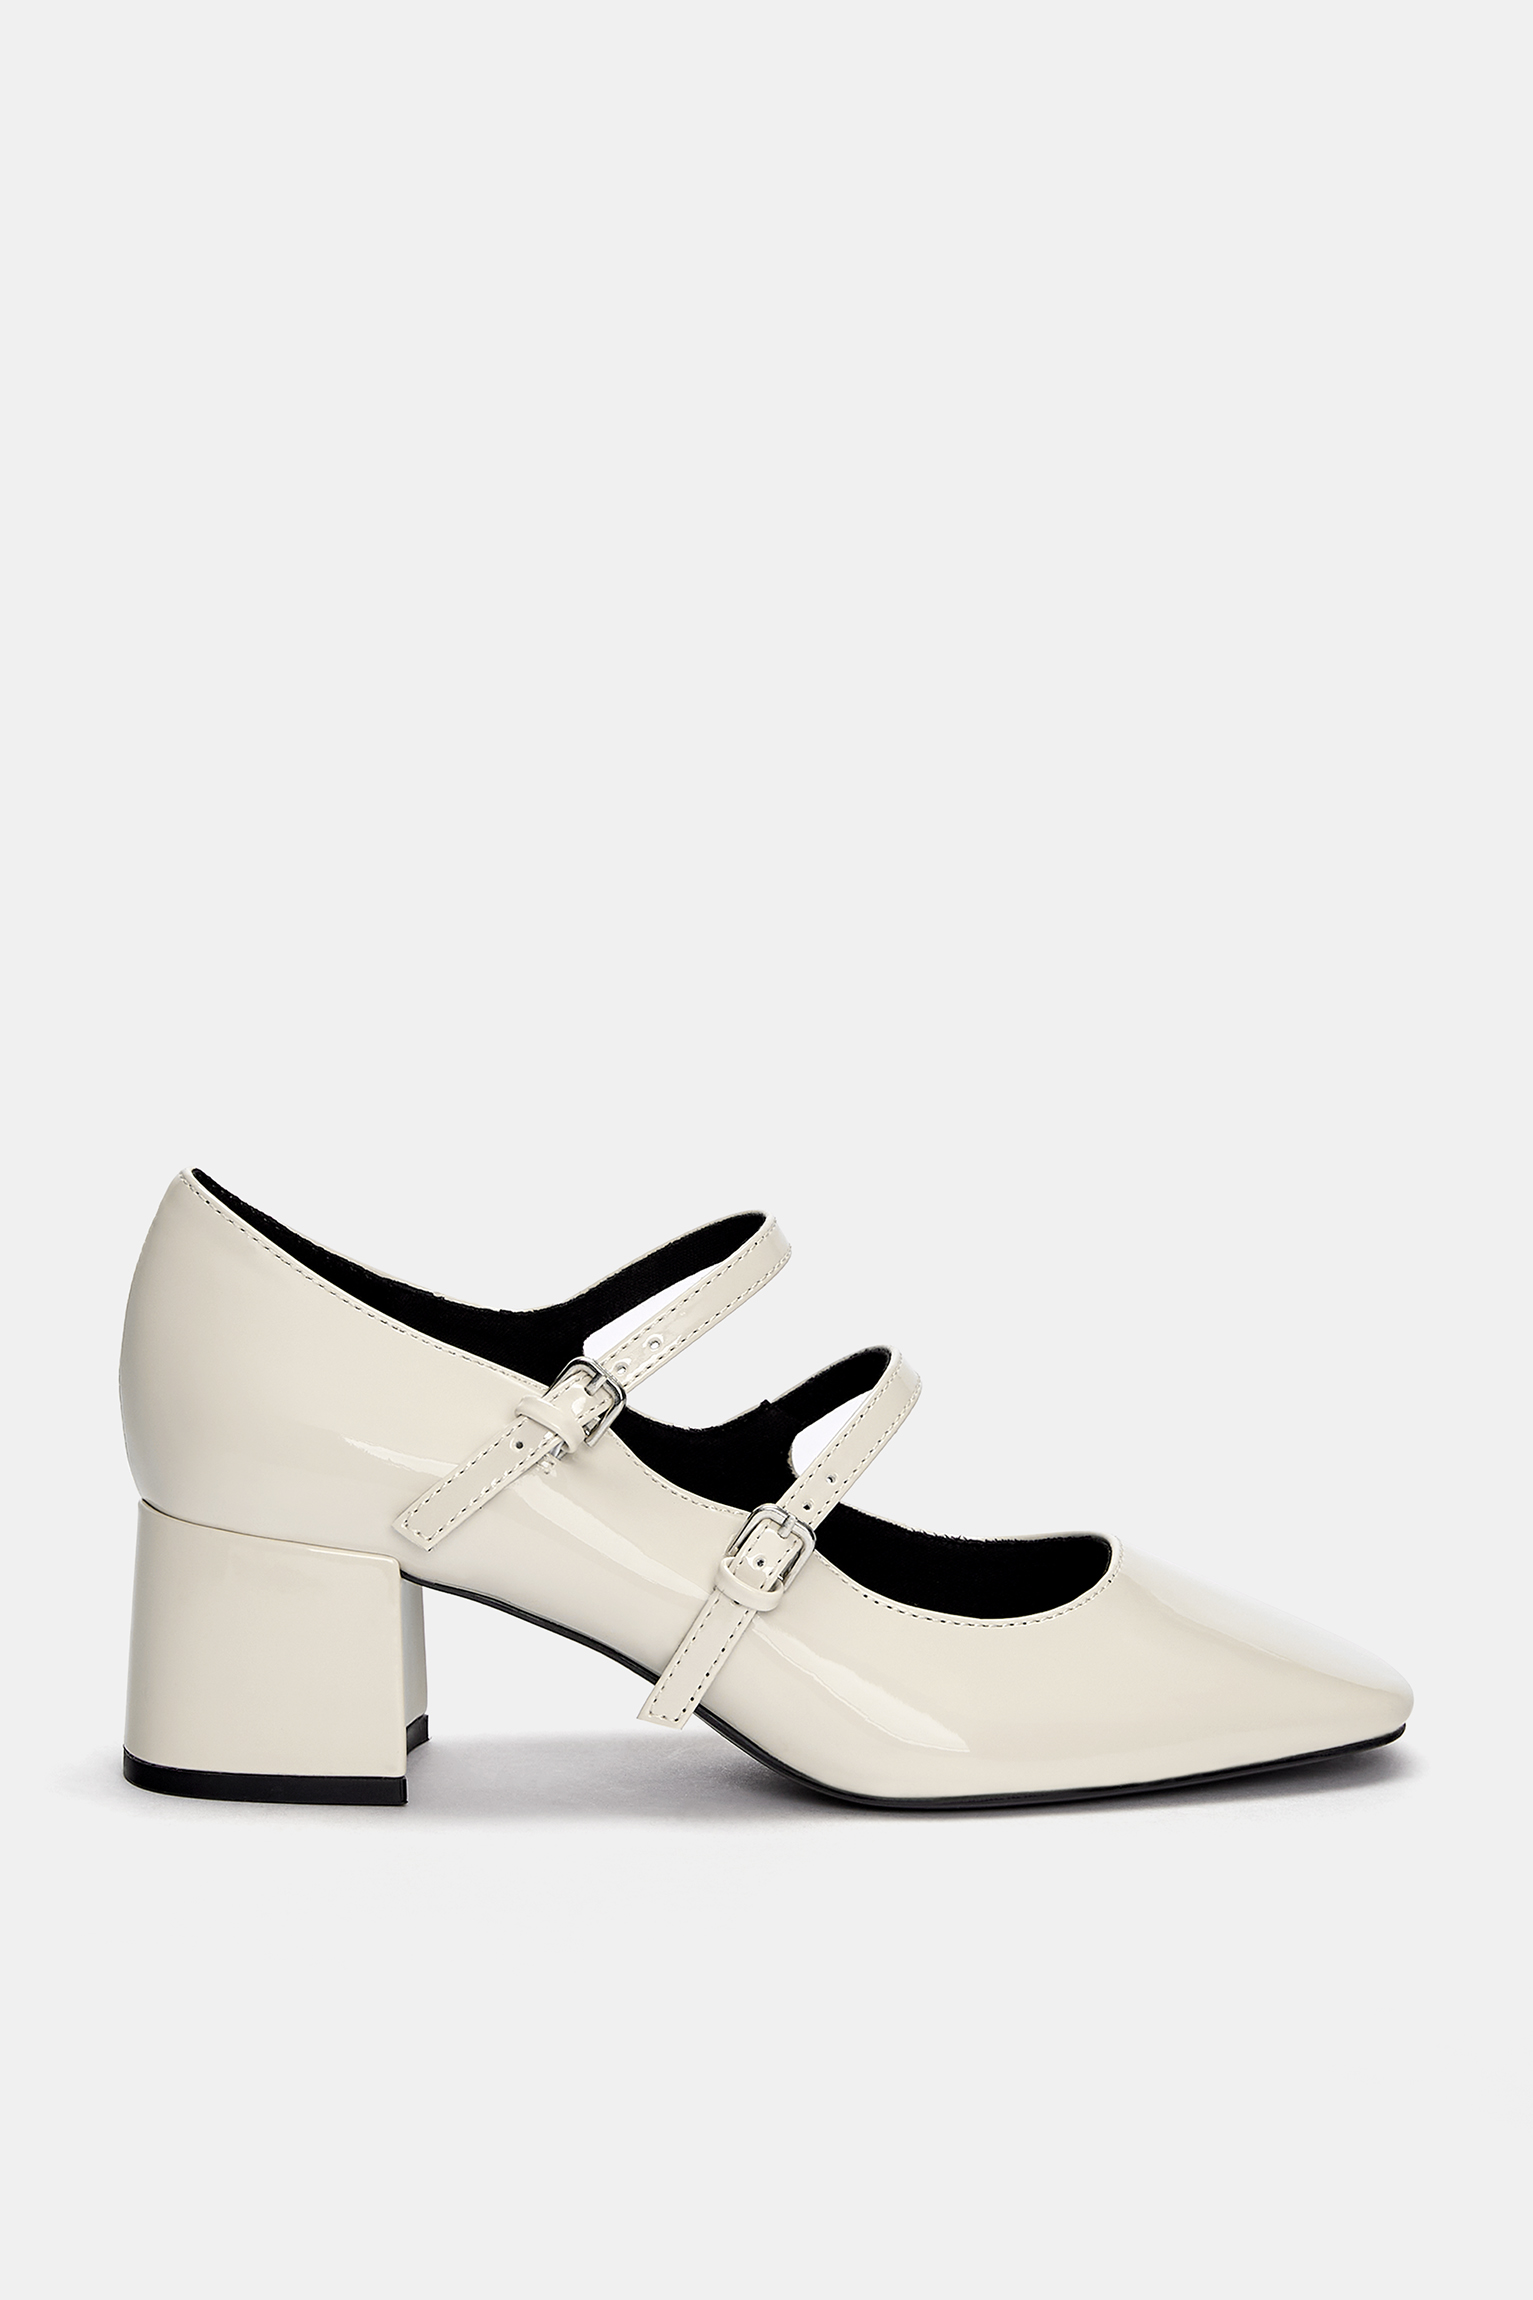 Girls Spanish White Classic Leather Patent Mary Jane Shoes